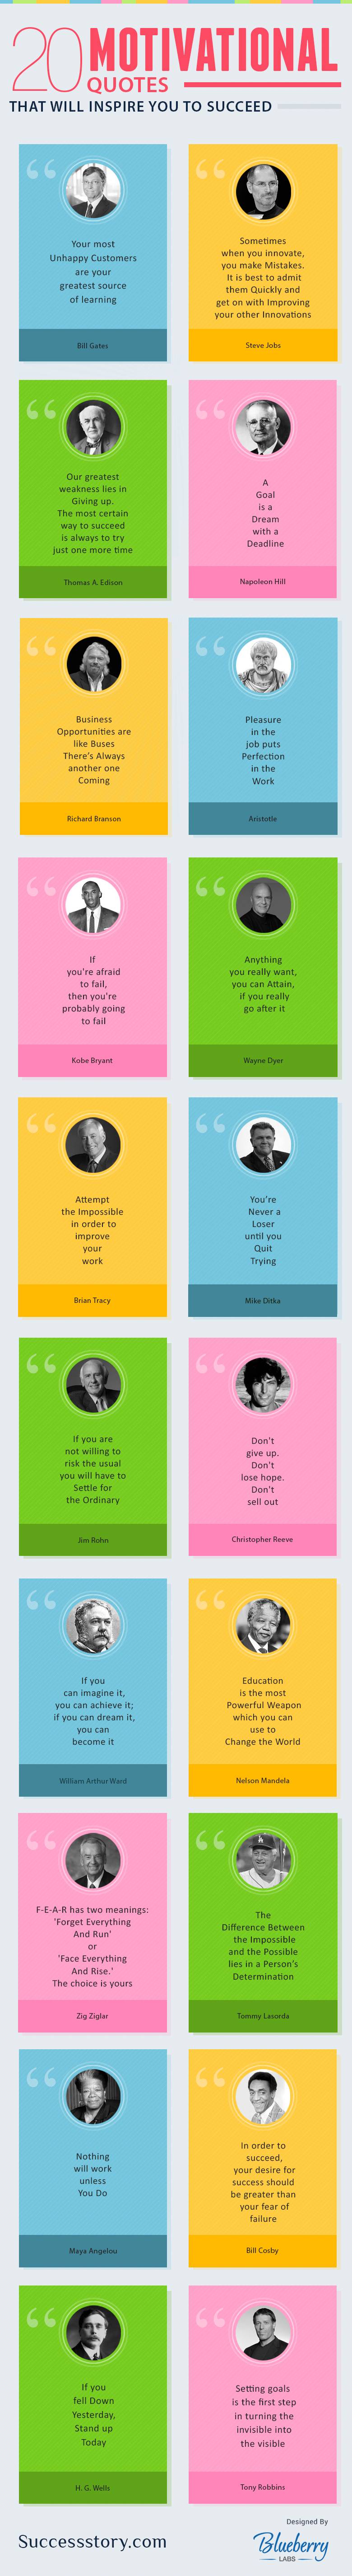 Need the best motivational quotes? This infographic is your answer! Read the best quotes from top personalities to lift you up and keep you going. 